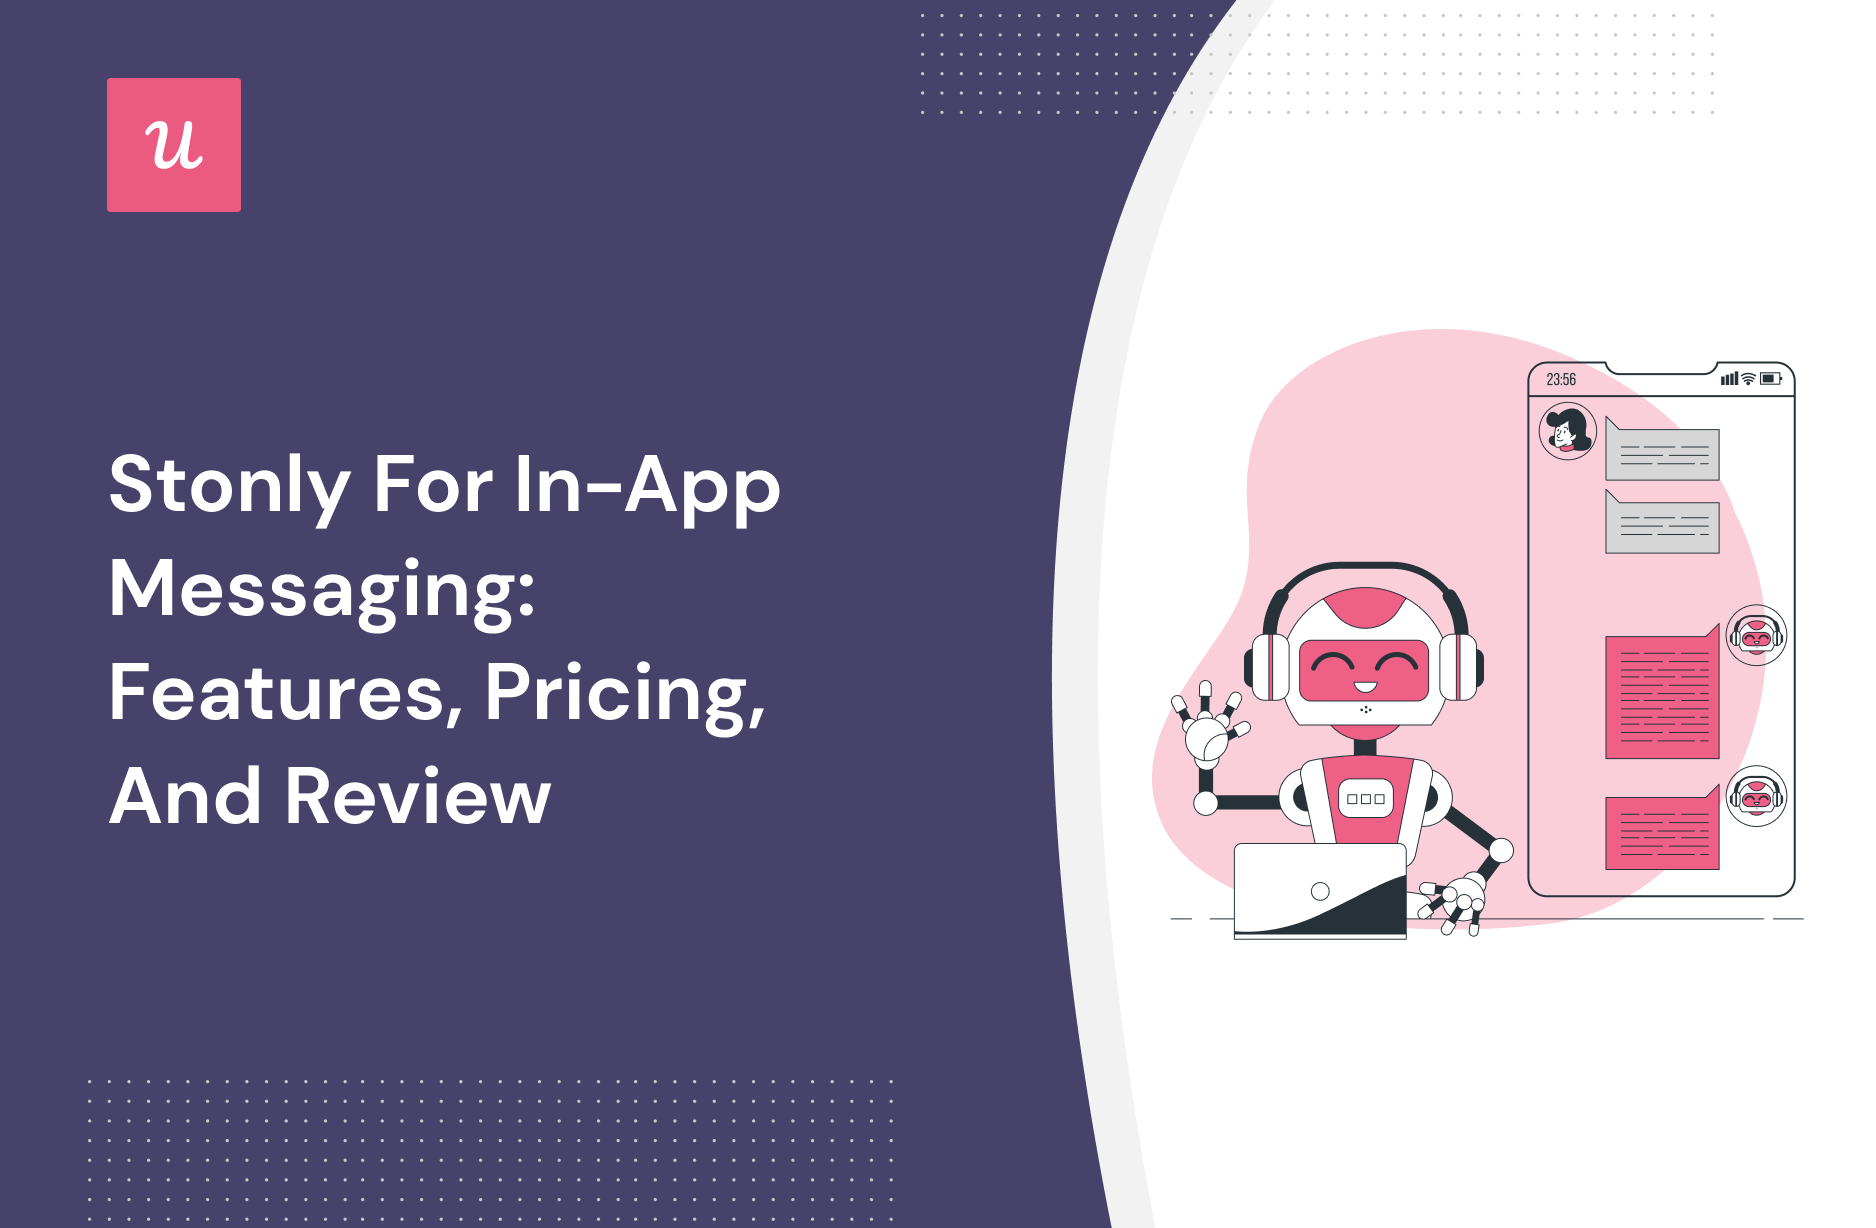 Stonly for In-App Messaging: Features, Pricing, and Review